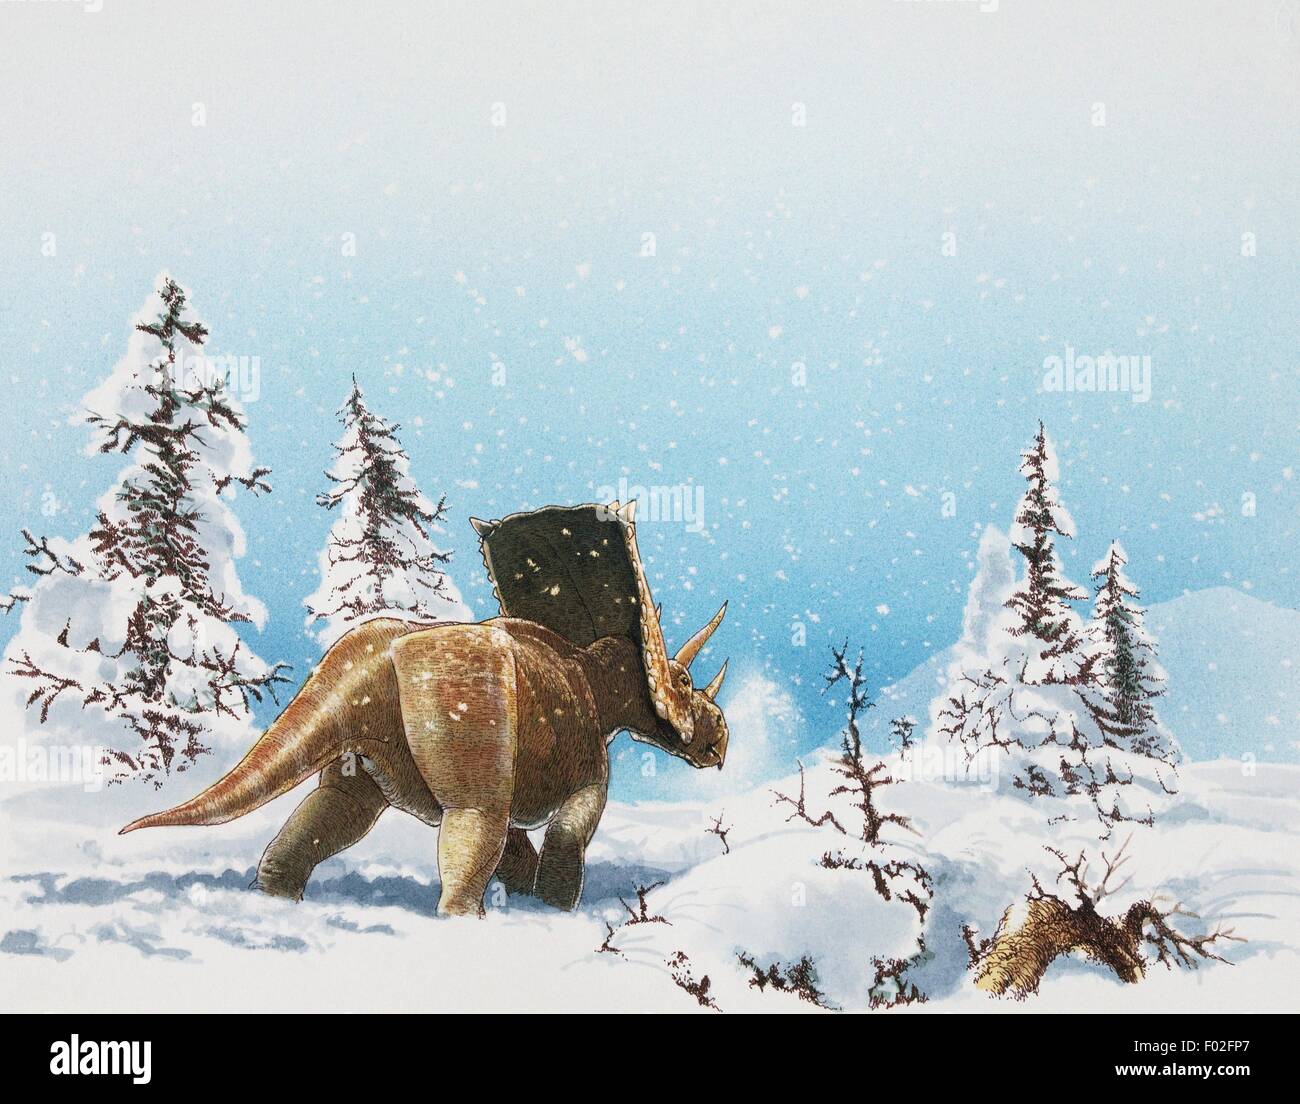 Chasmosaurus, Ceratopsidae, in the snow, Cretaceous. Artwork by James Robins. Stock Photo